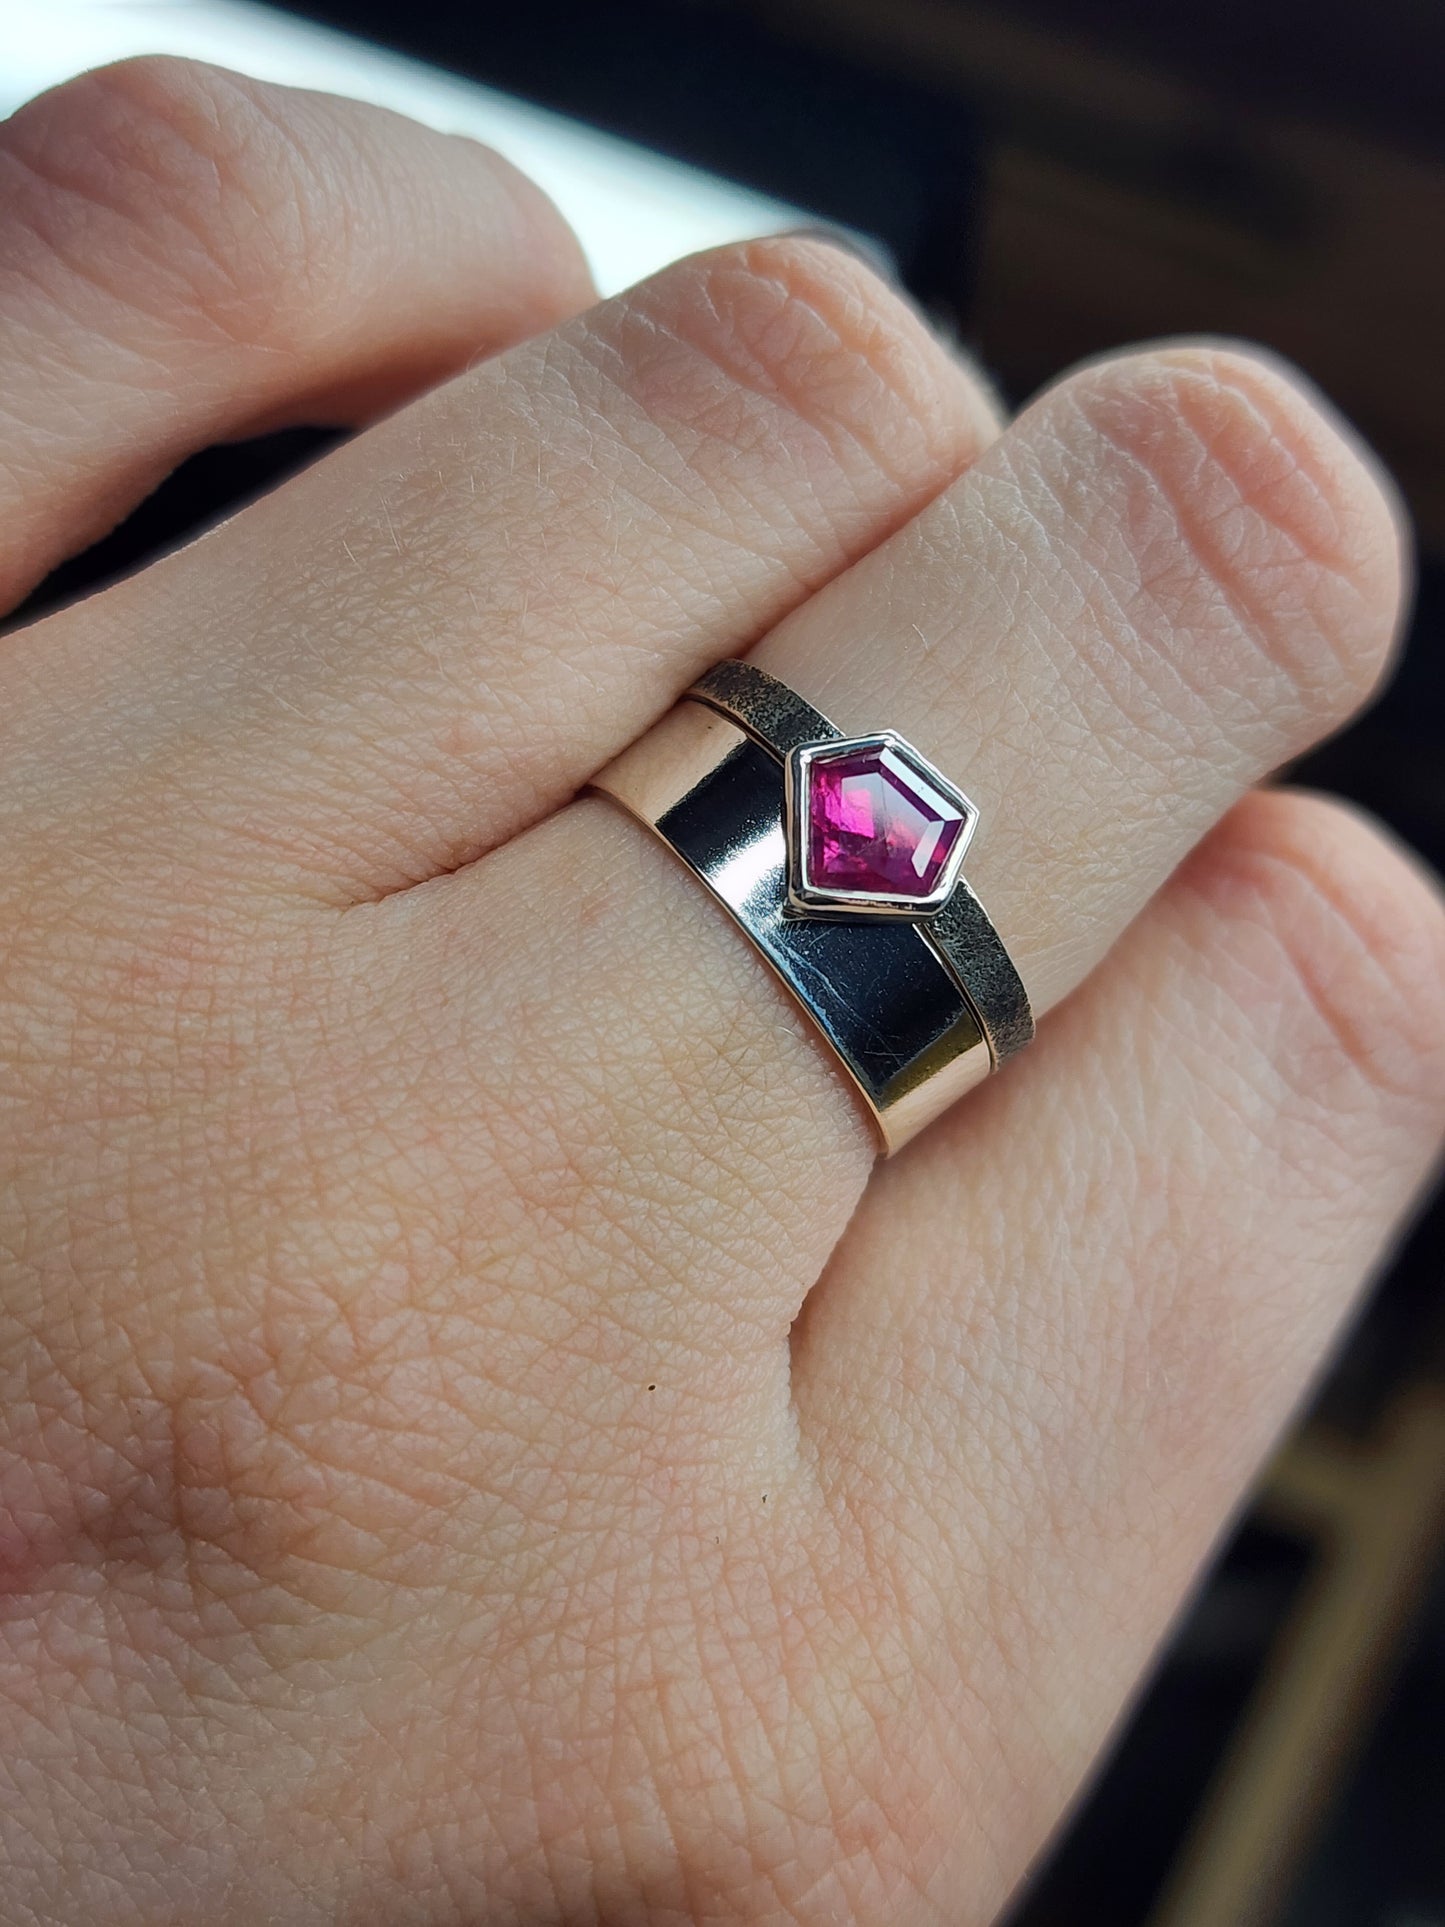 Pink Winza Sapphire, Natural Gemstone Ring, Sterling Silver, Antique Minimalist Inspired Ring Set, Textured Band, Size 7.5 U.S.